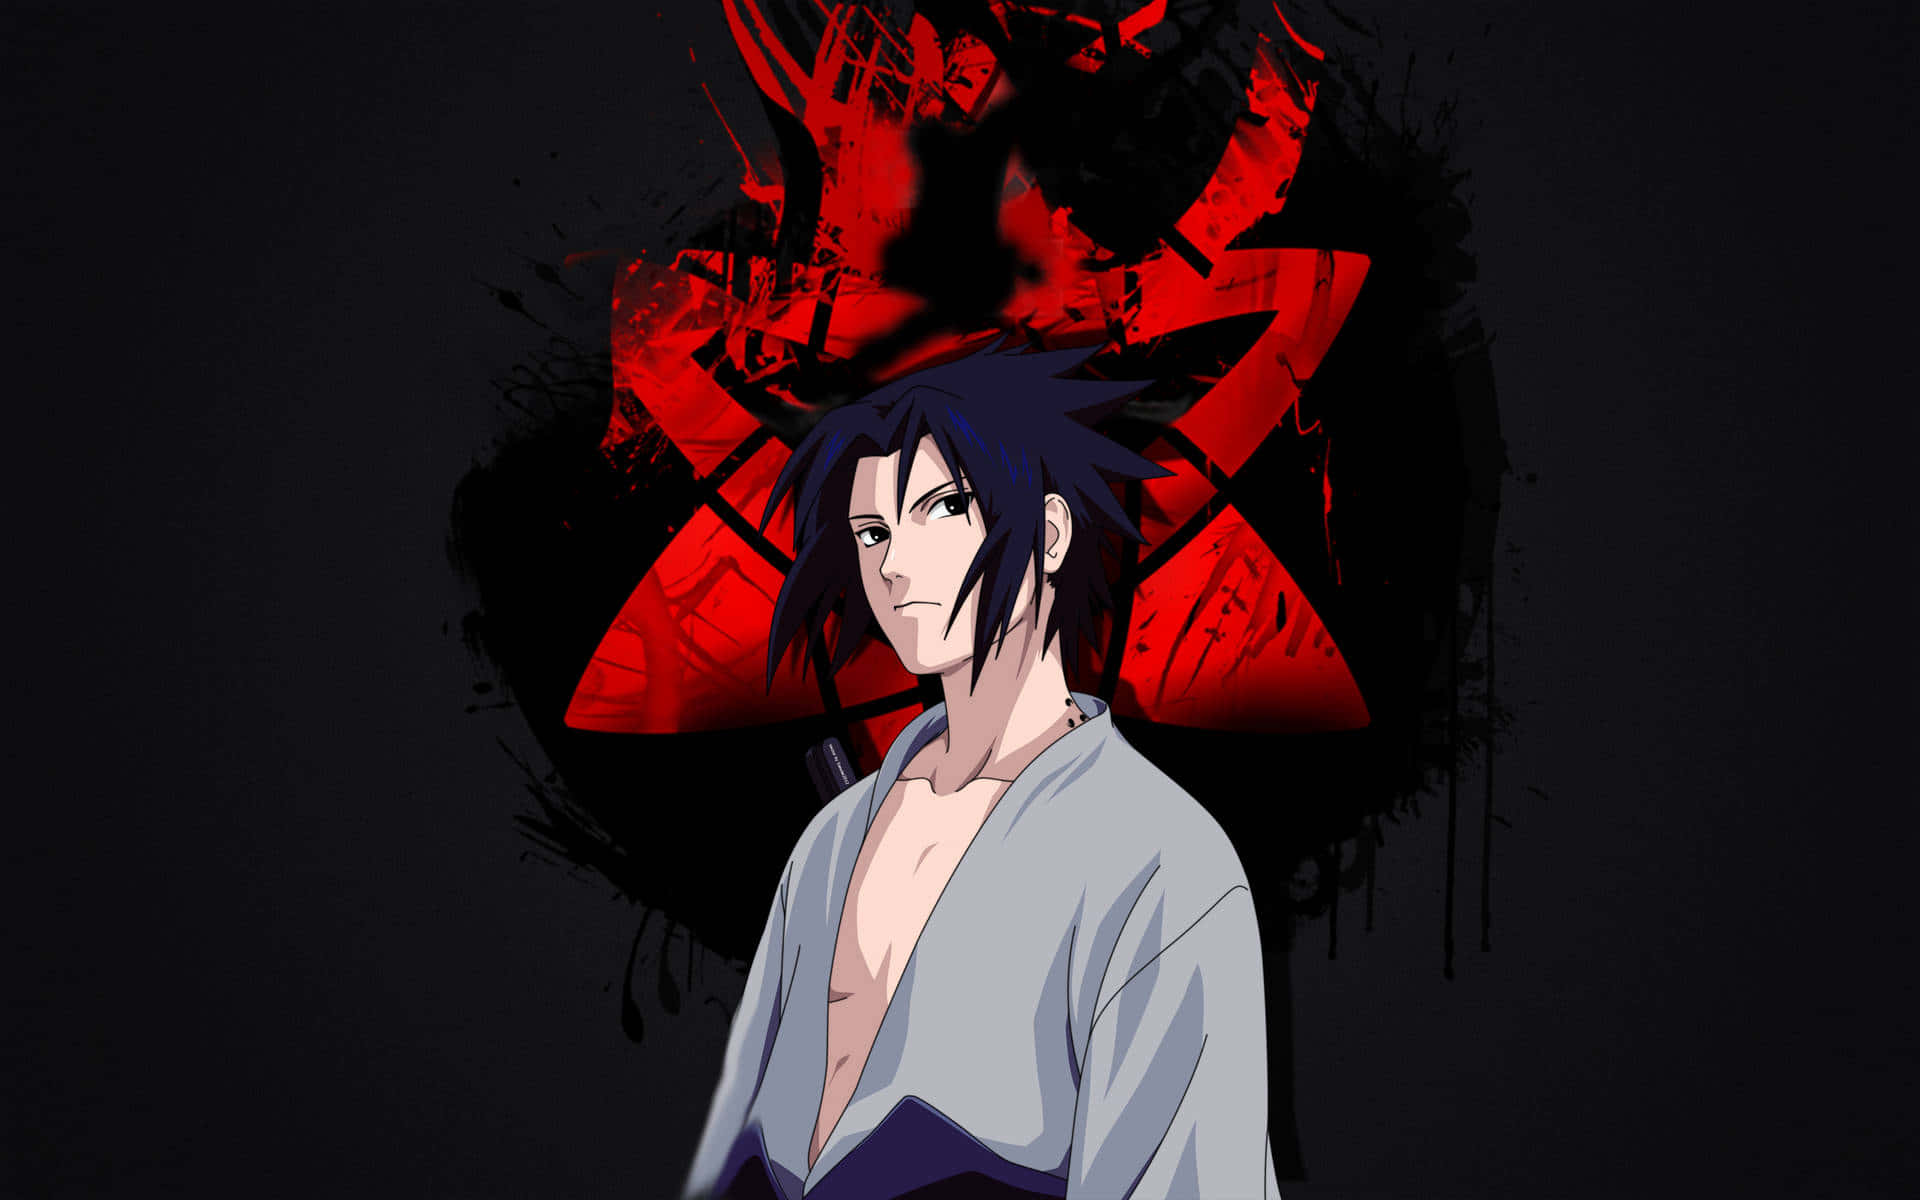 Join The Uchiha Clan in their Quest for Power. Wallpaper